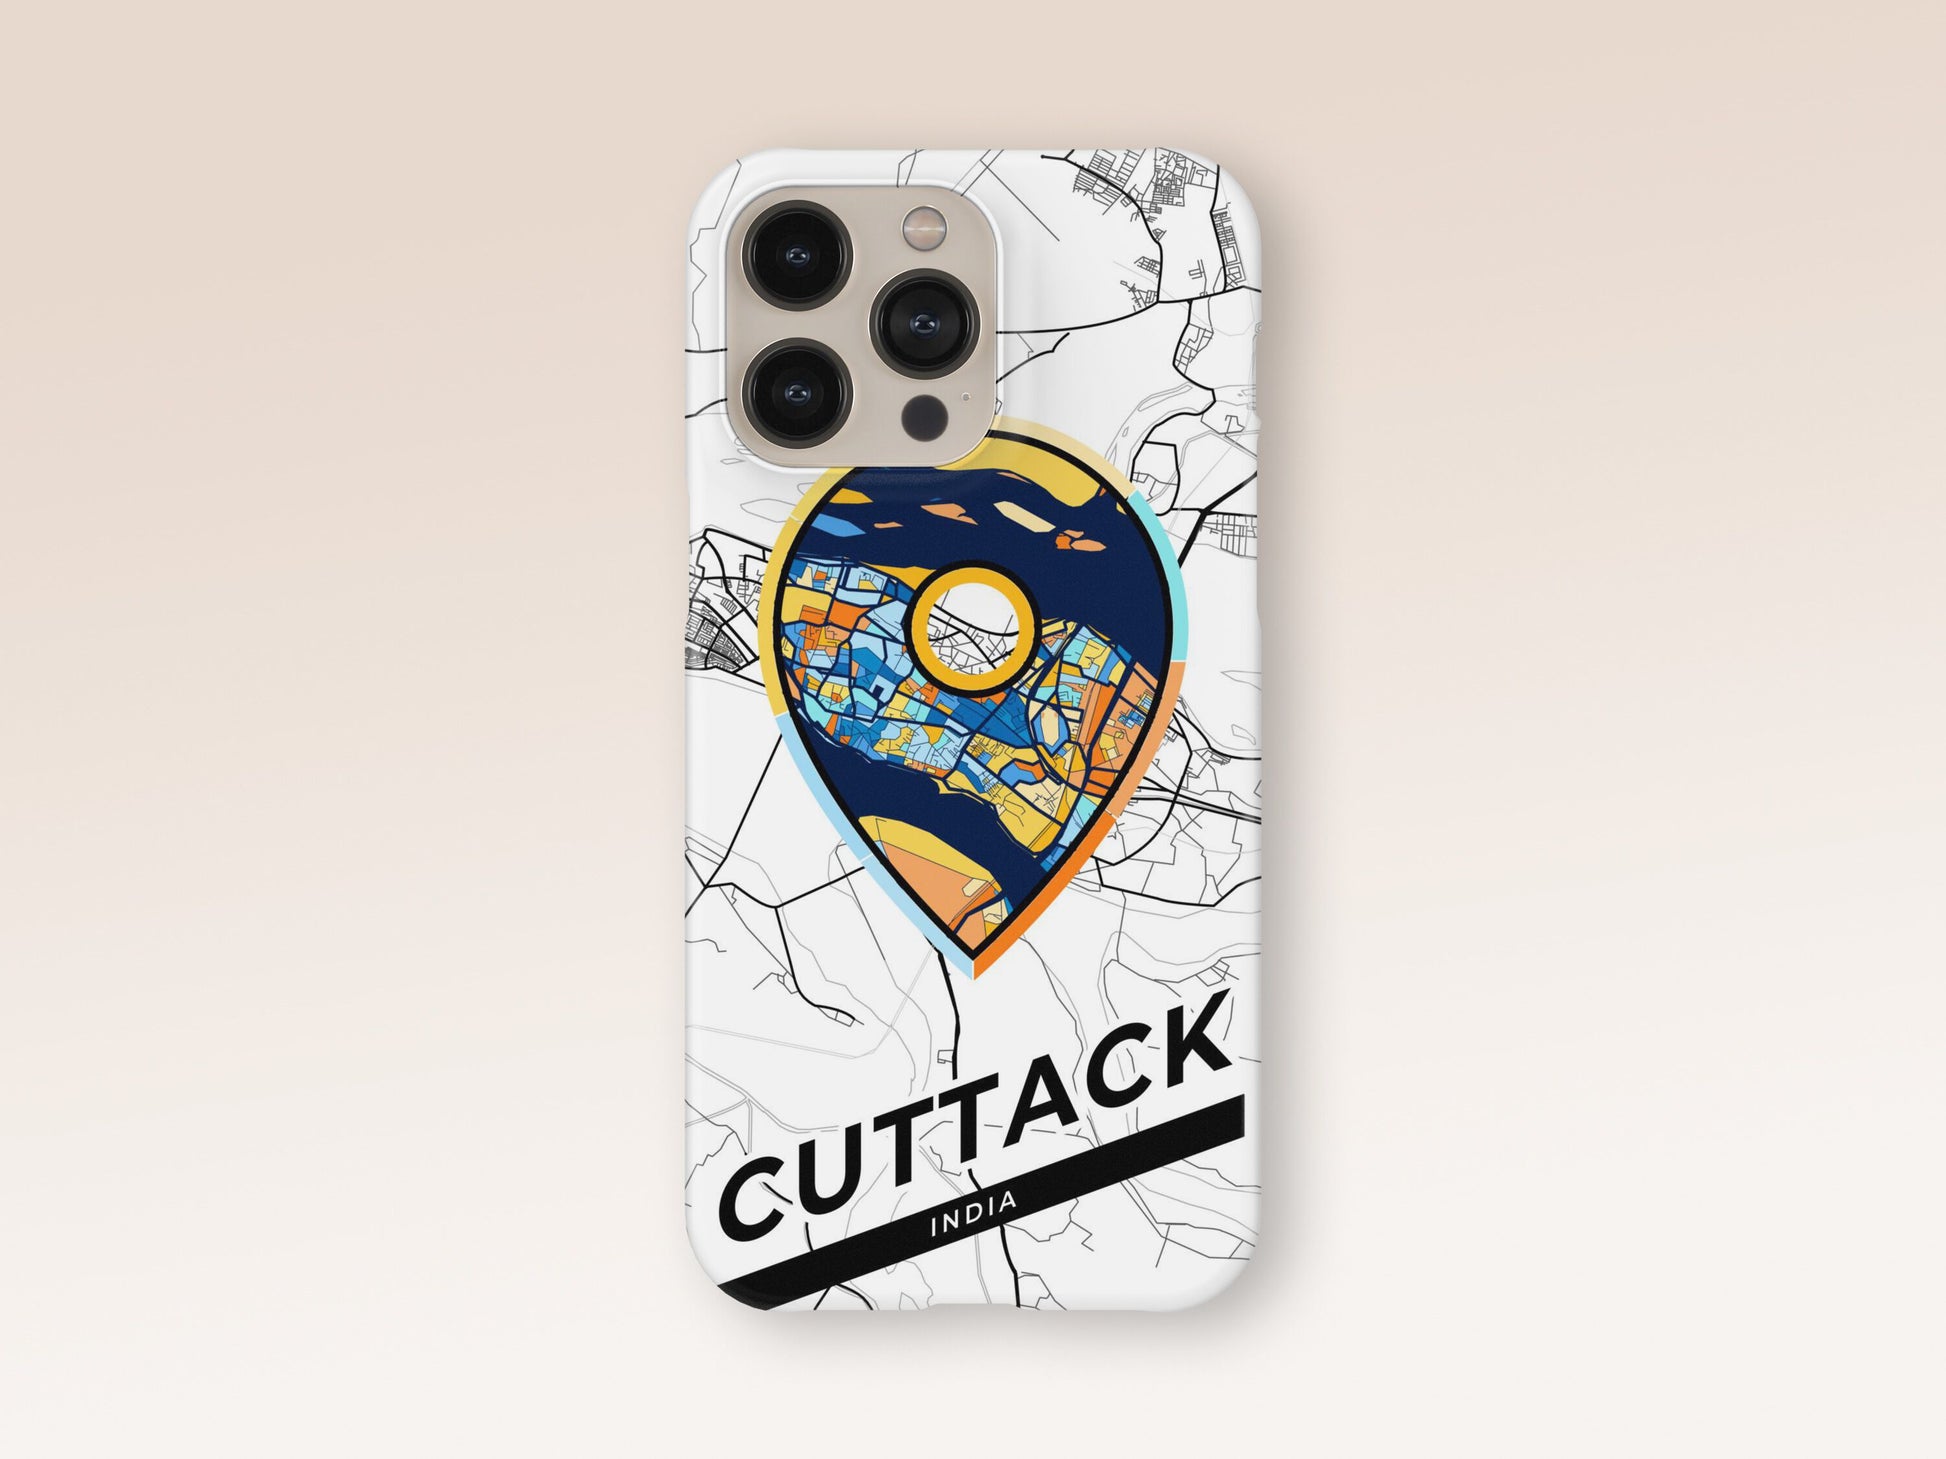 Cuttack India slim phone case with colorful icon. Birthday, wedding or housewarming gift. Couple match cases. 1